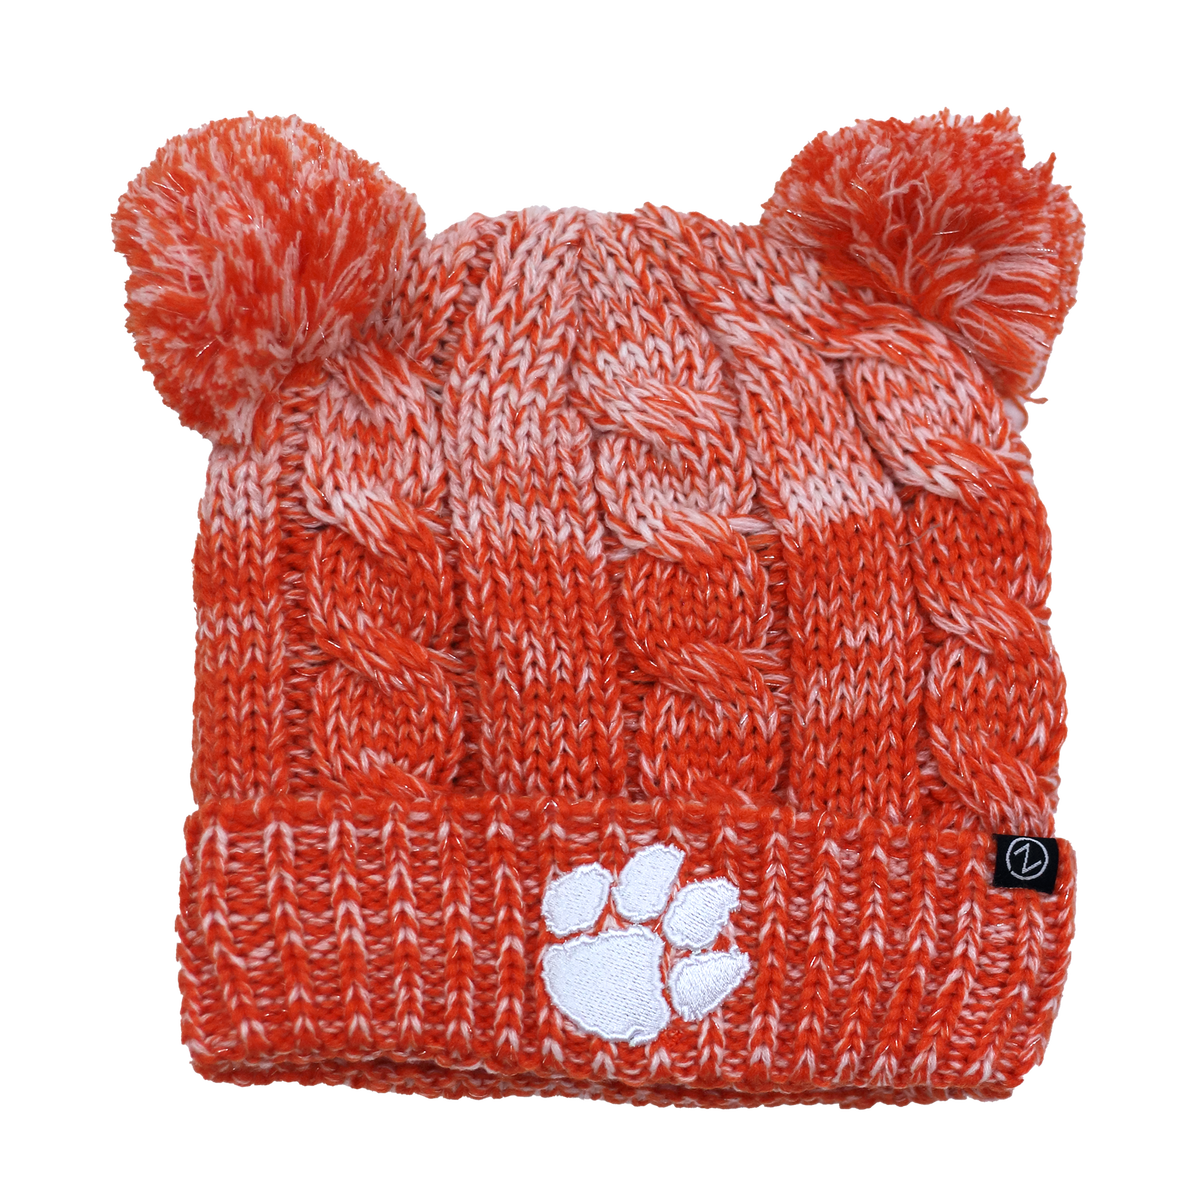 Clemson Annapolis Orange and White Knit Hat with 2 Poms